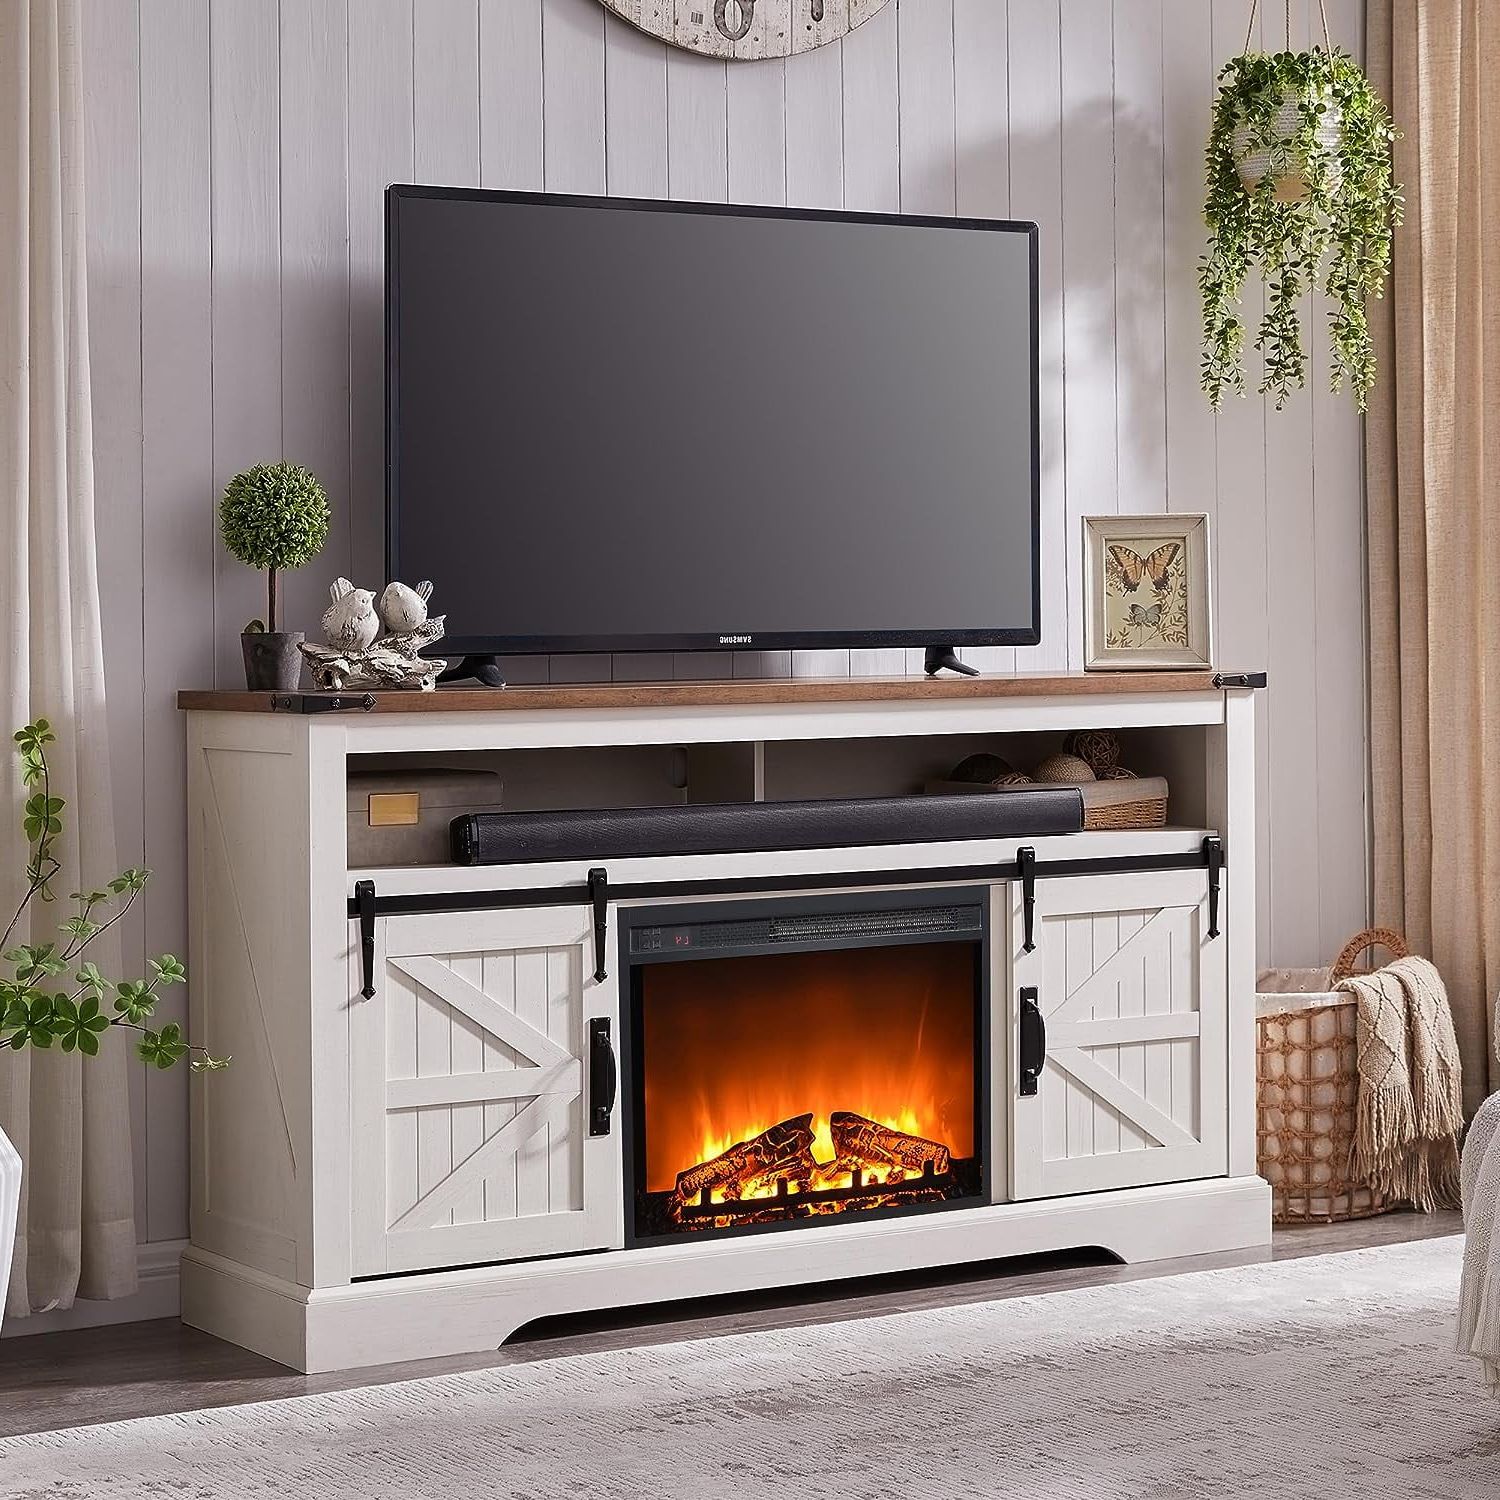 Okd Farmhouse 60" Electric Fireplace Tv Stand For Tvs Up To 65", Large Entertainment  Center With Fireplace For Living Room, Bedroom, Antique White – Walmart Throughout Tv Stands With Electric Fireplace (Gallery 9 of 20)